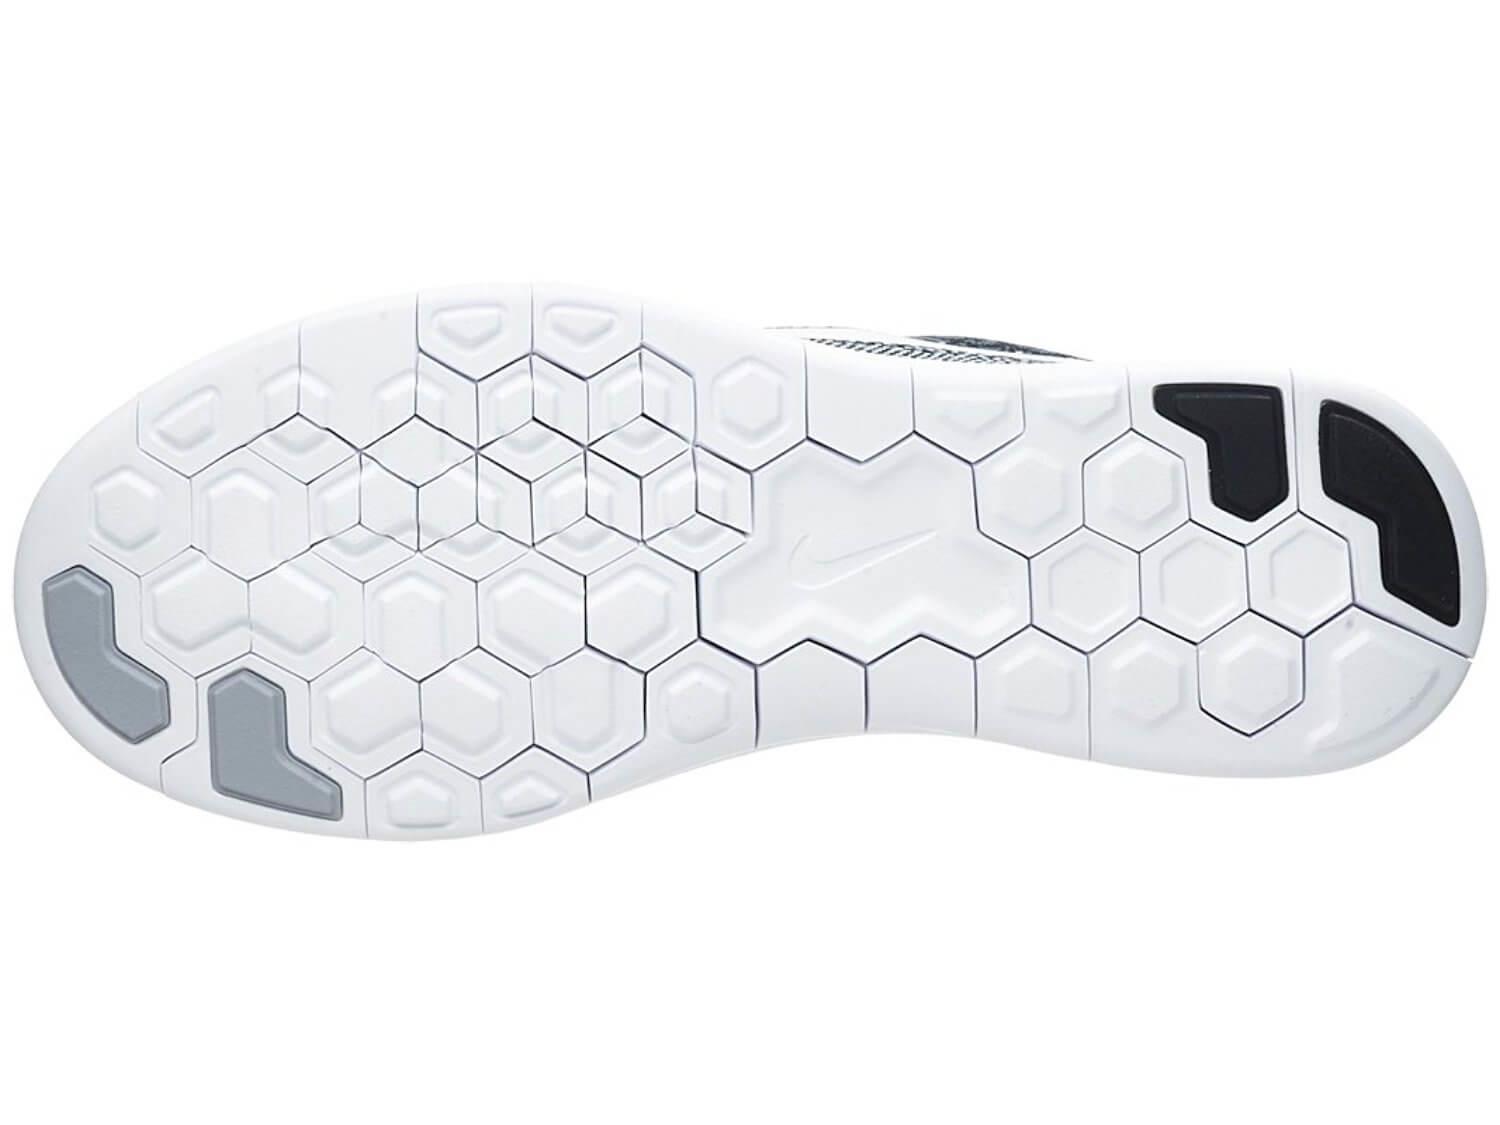 BRS 1000 carbon rubber was used to design the durable outsole of the Nike Free RN Distance.